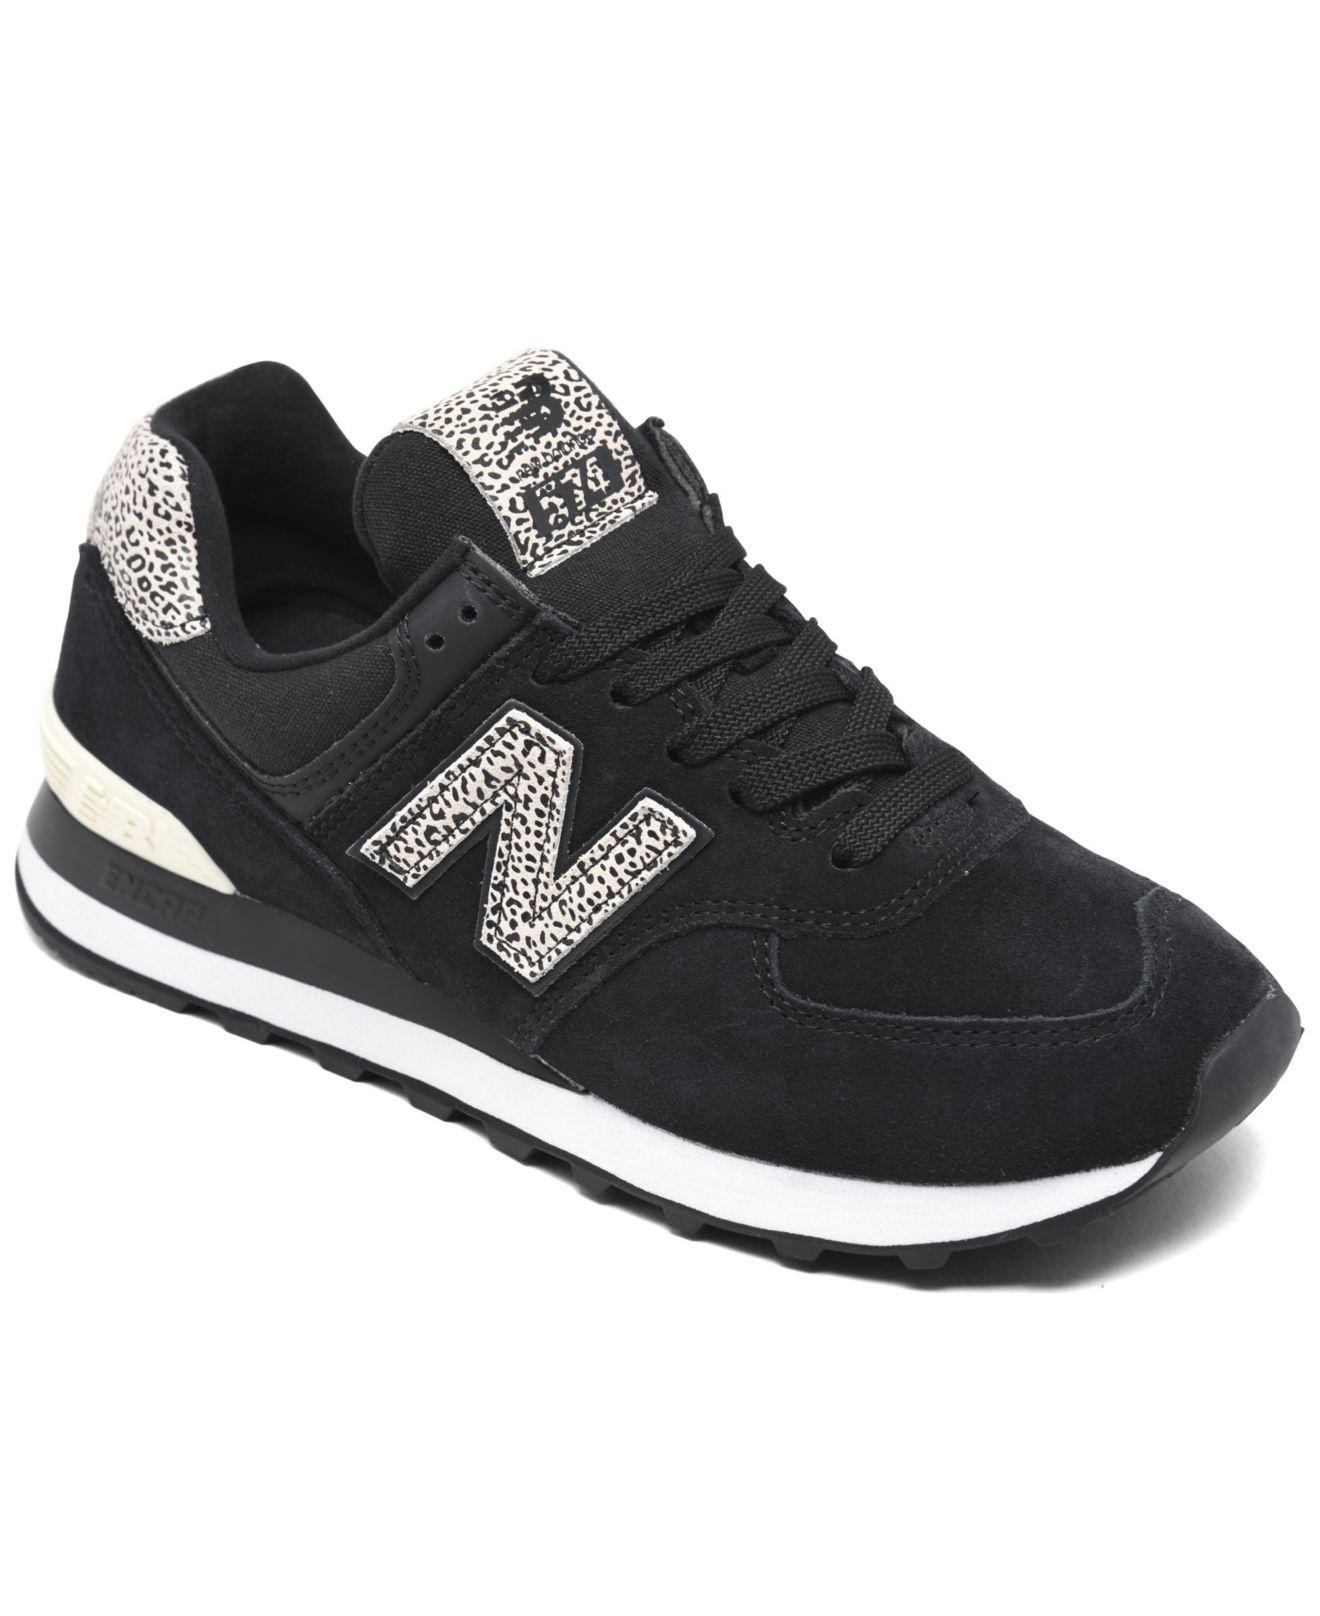 New Balance Suede 574 Leopard Casual Sneakers From Finish Line in Black |  Lyst